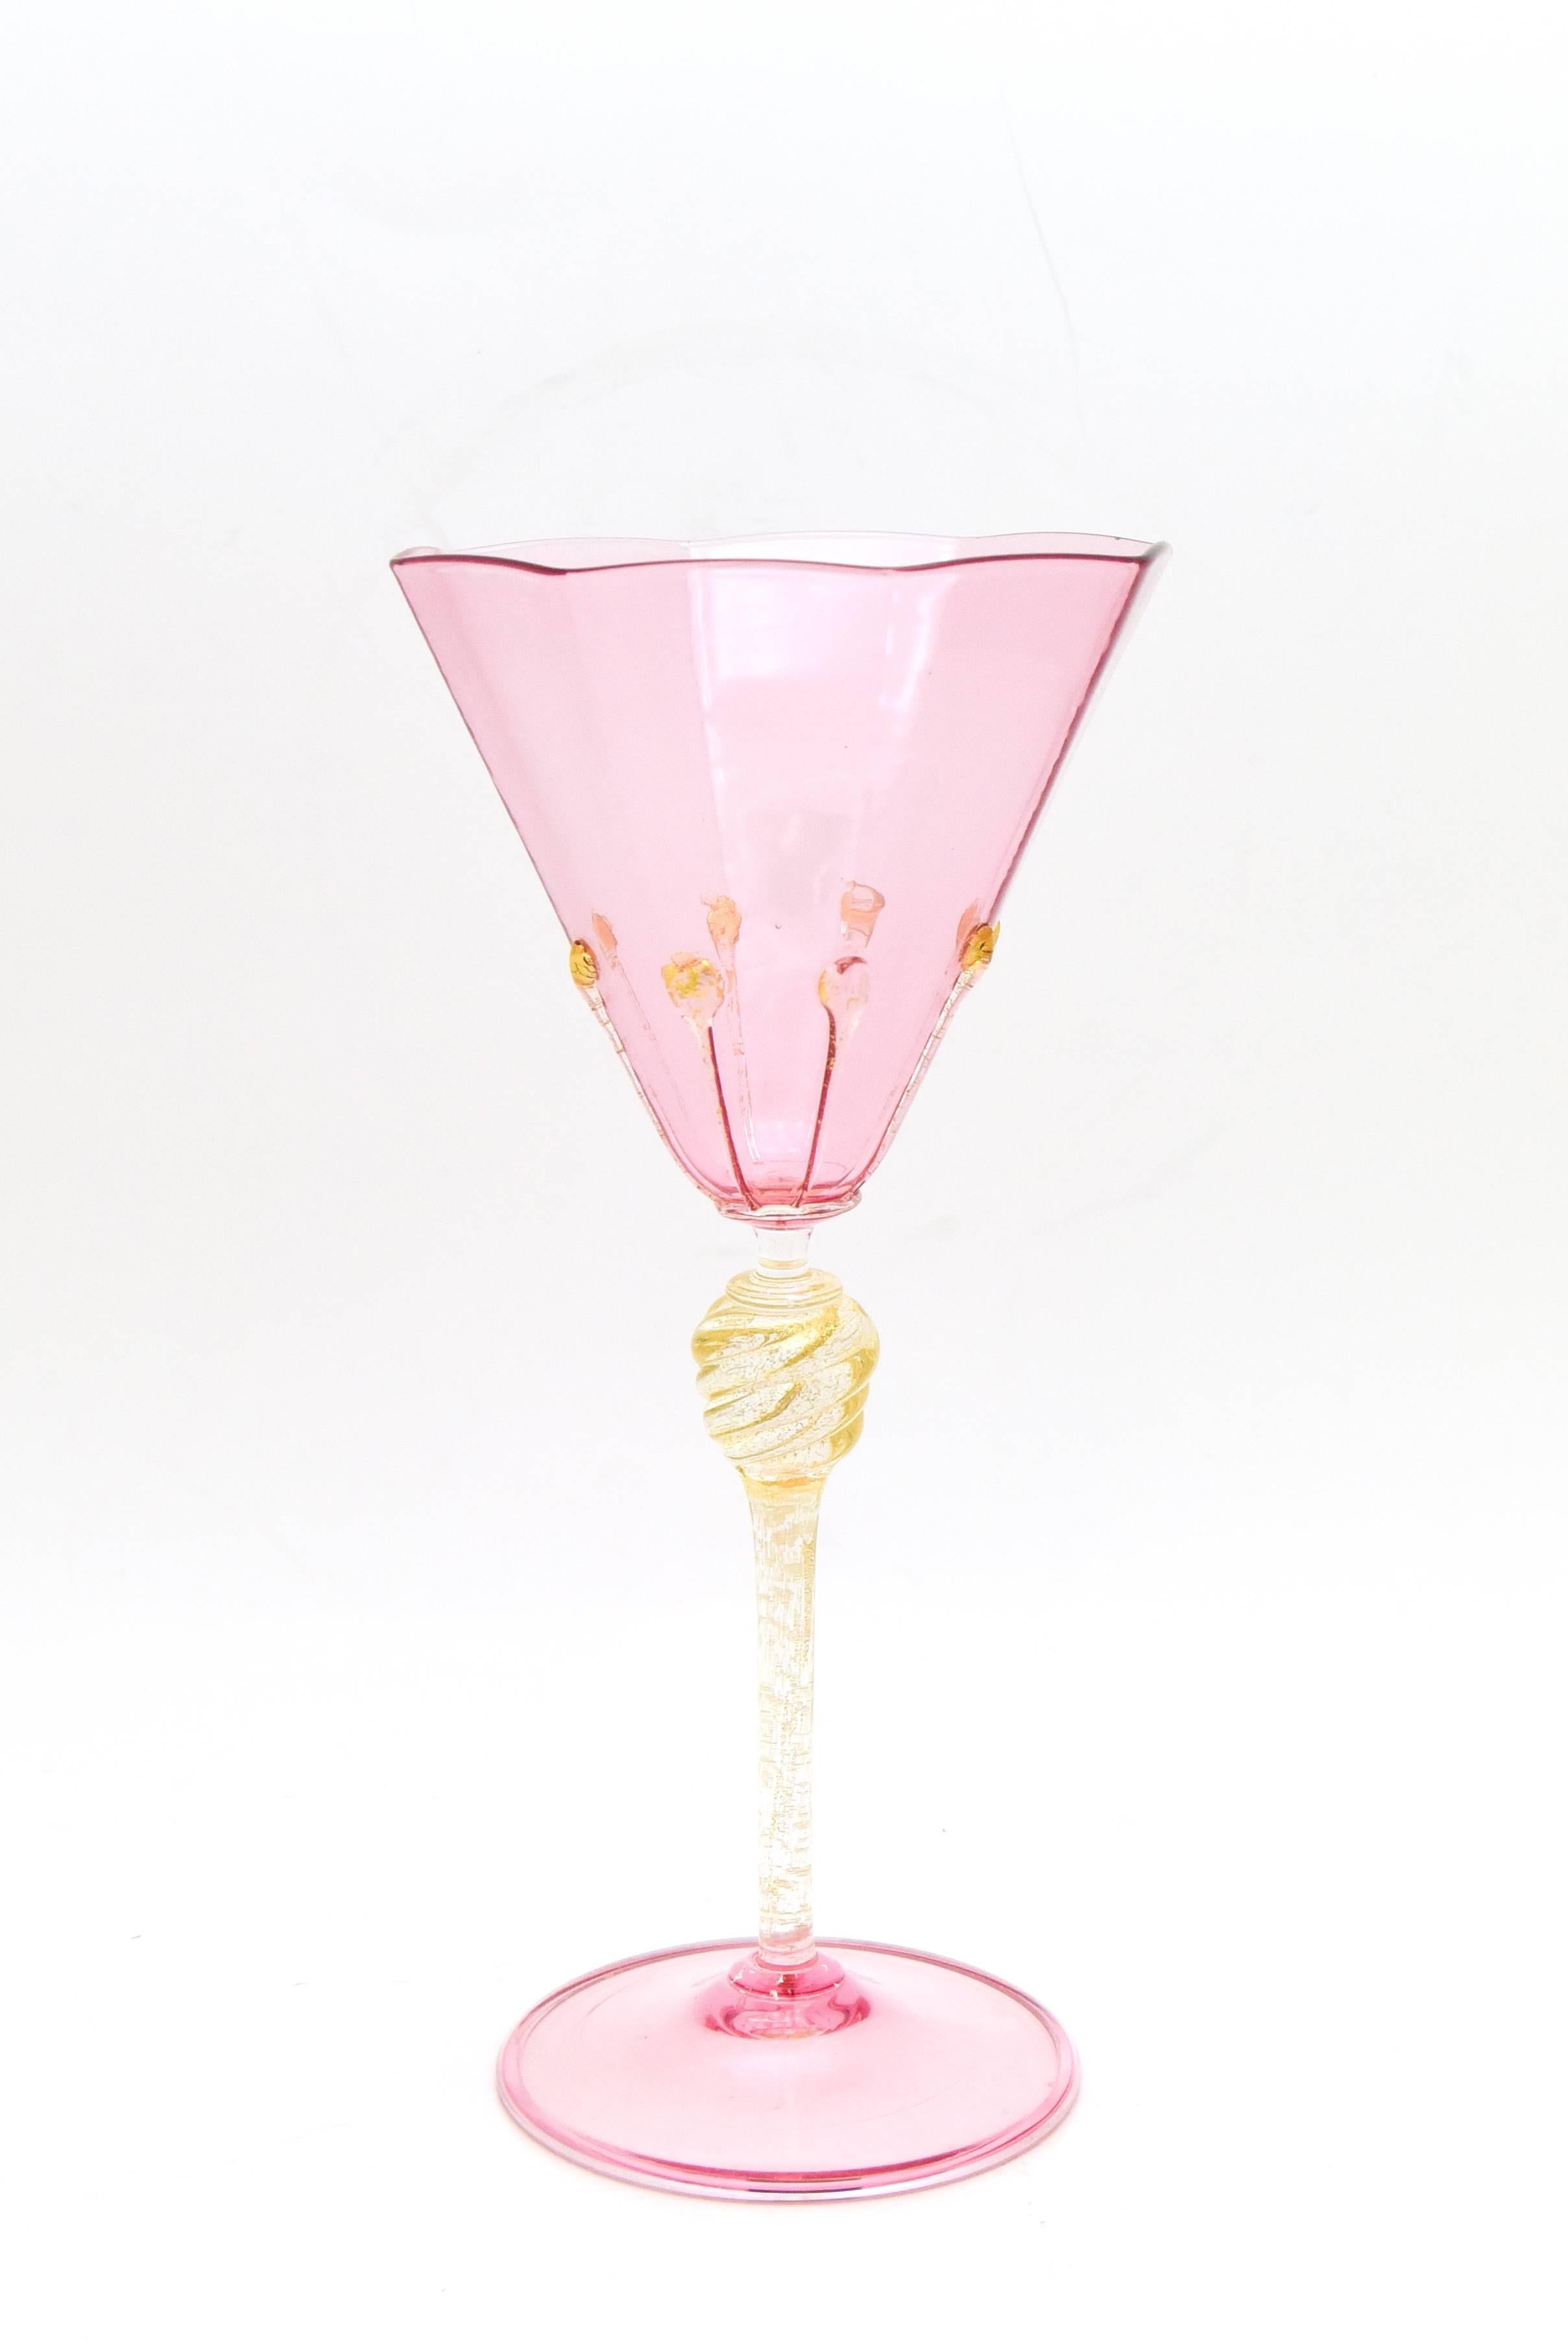 Salviati Venetian Complete Table Service for 12 Handblown Pink and Gold Goblets 3